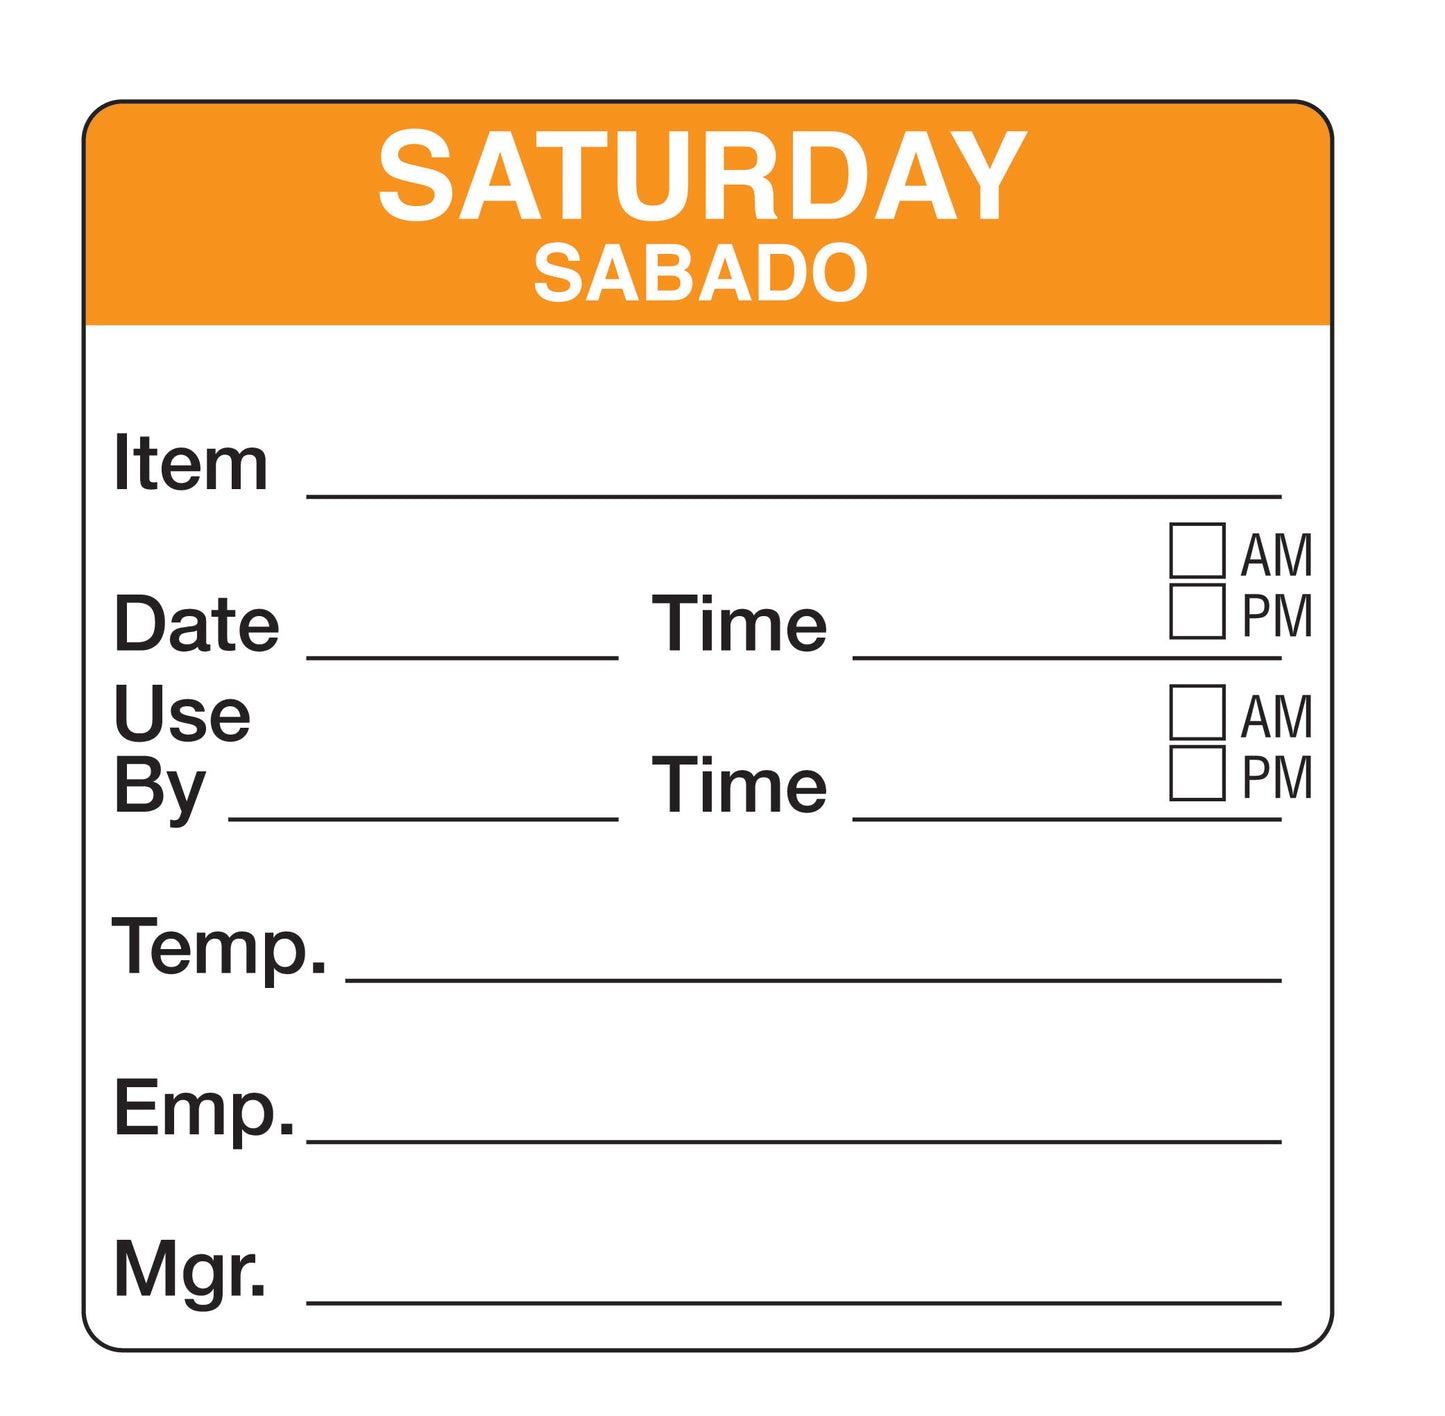 Saturday - Sabado 2" x 2" Removable Day of the Week Prep Date Label